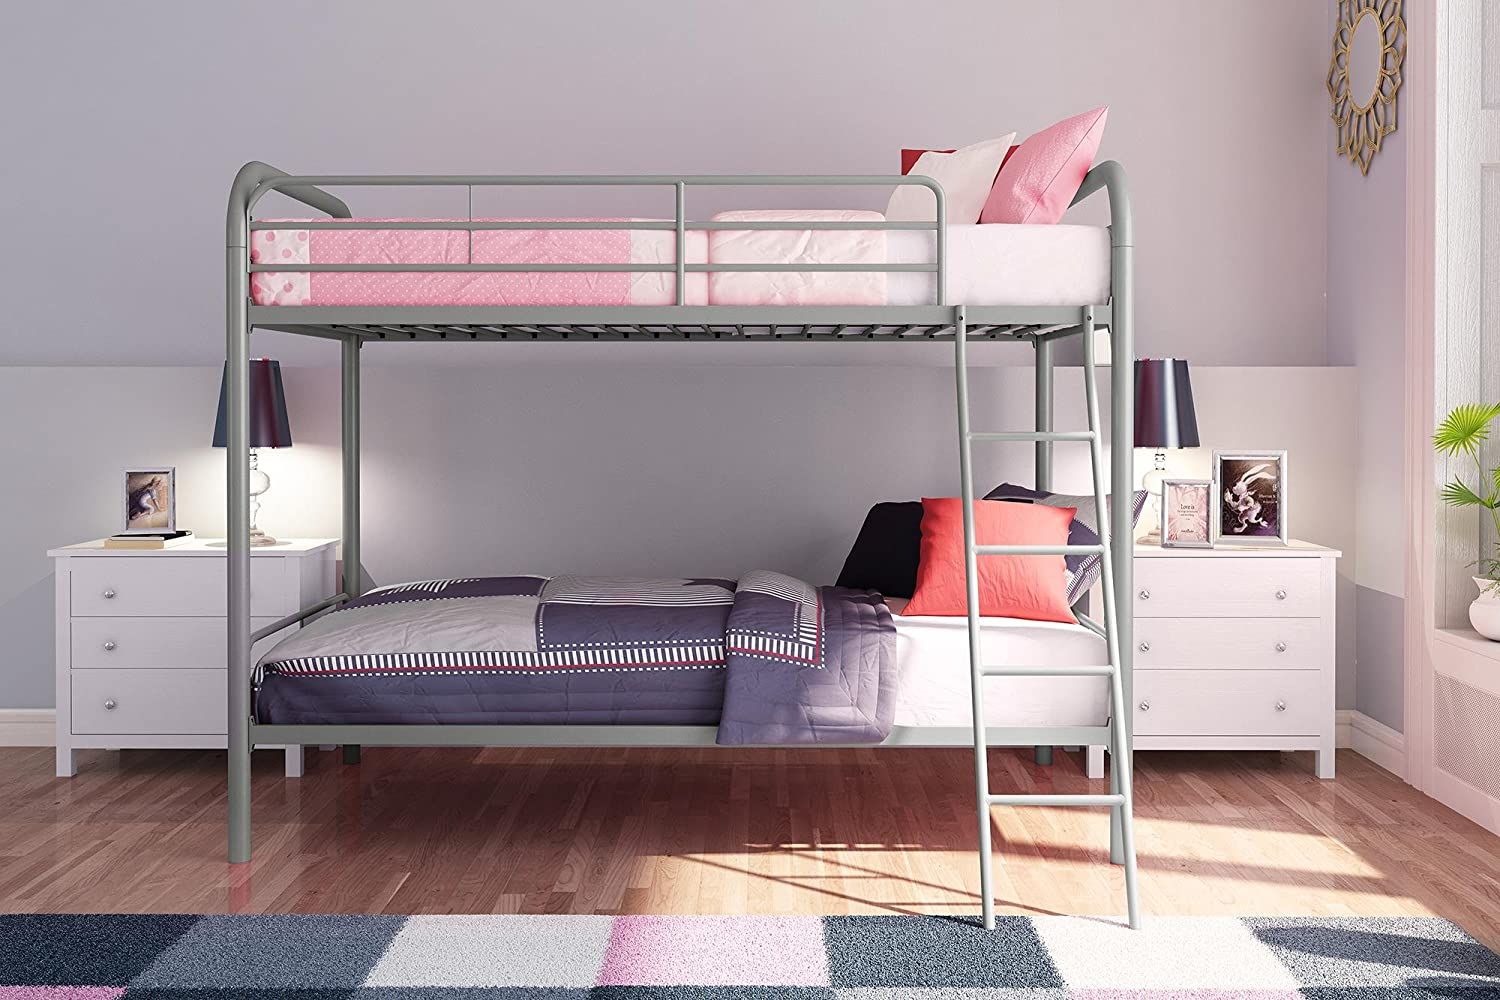 8 Best Bunk Beds 2020 The Strategist, Full Over Full Bunk Beds Rooms To Go